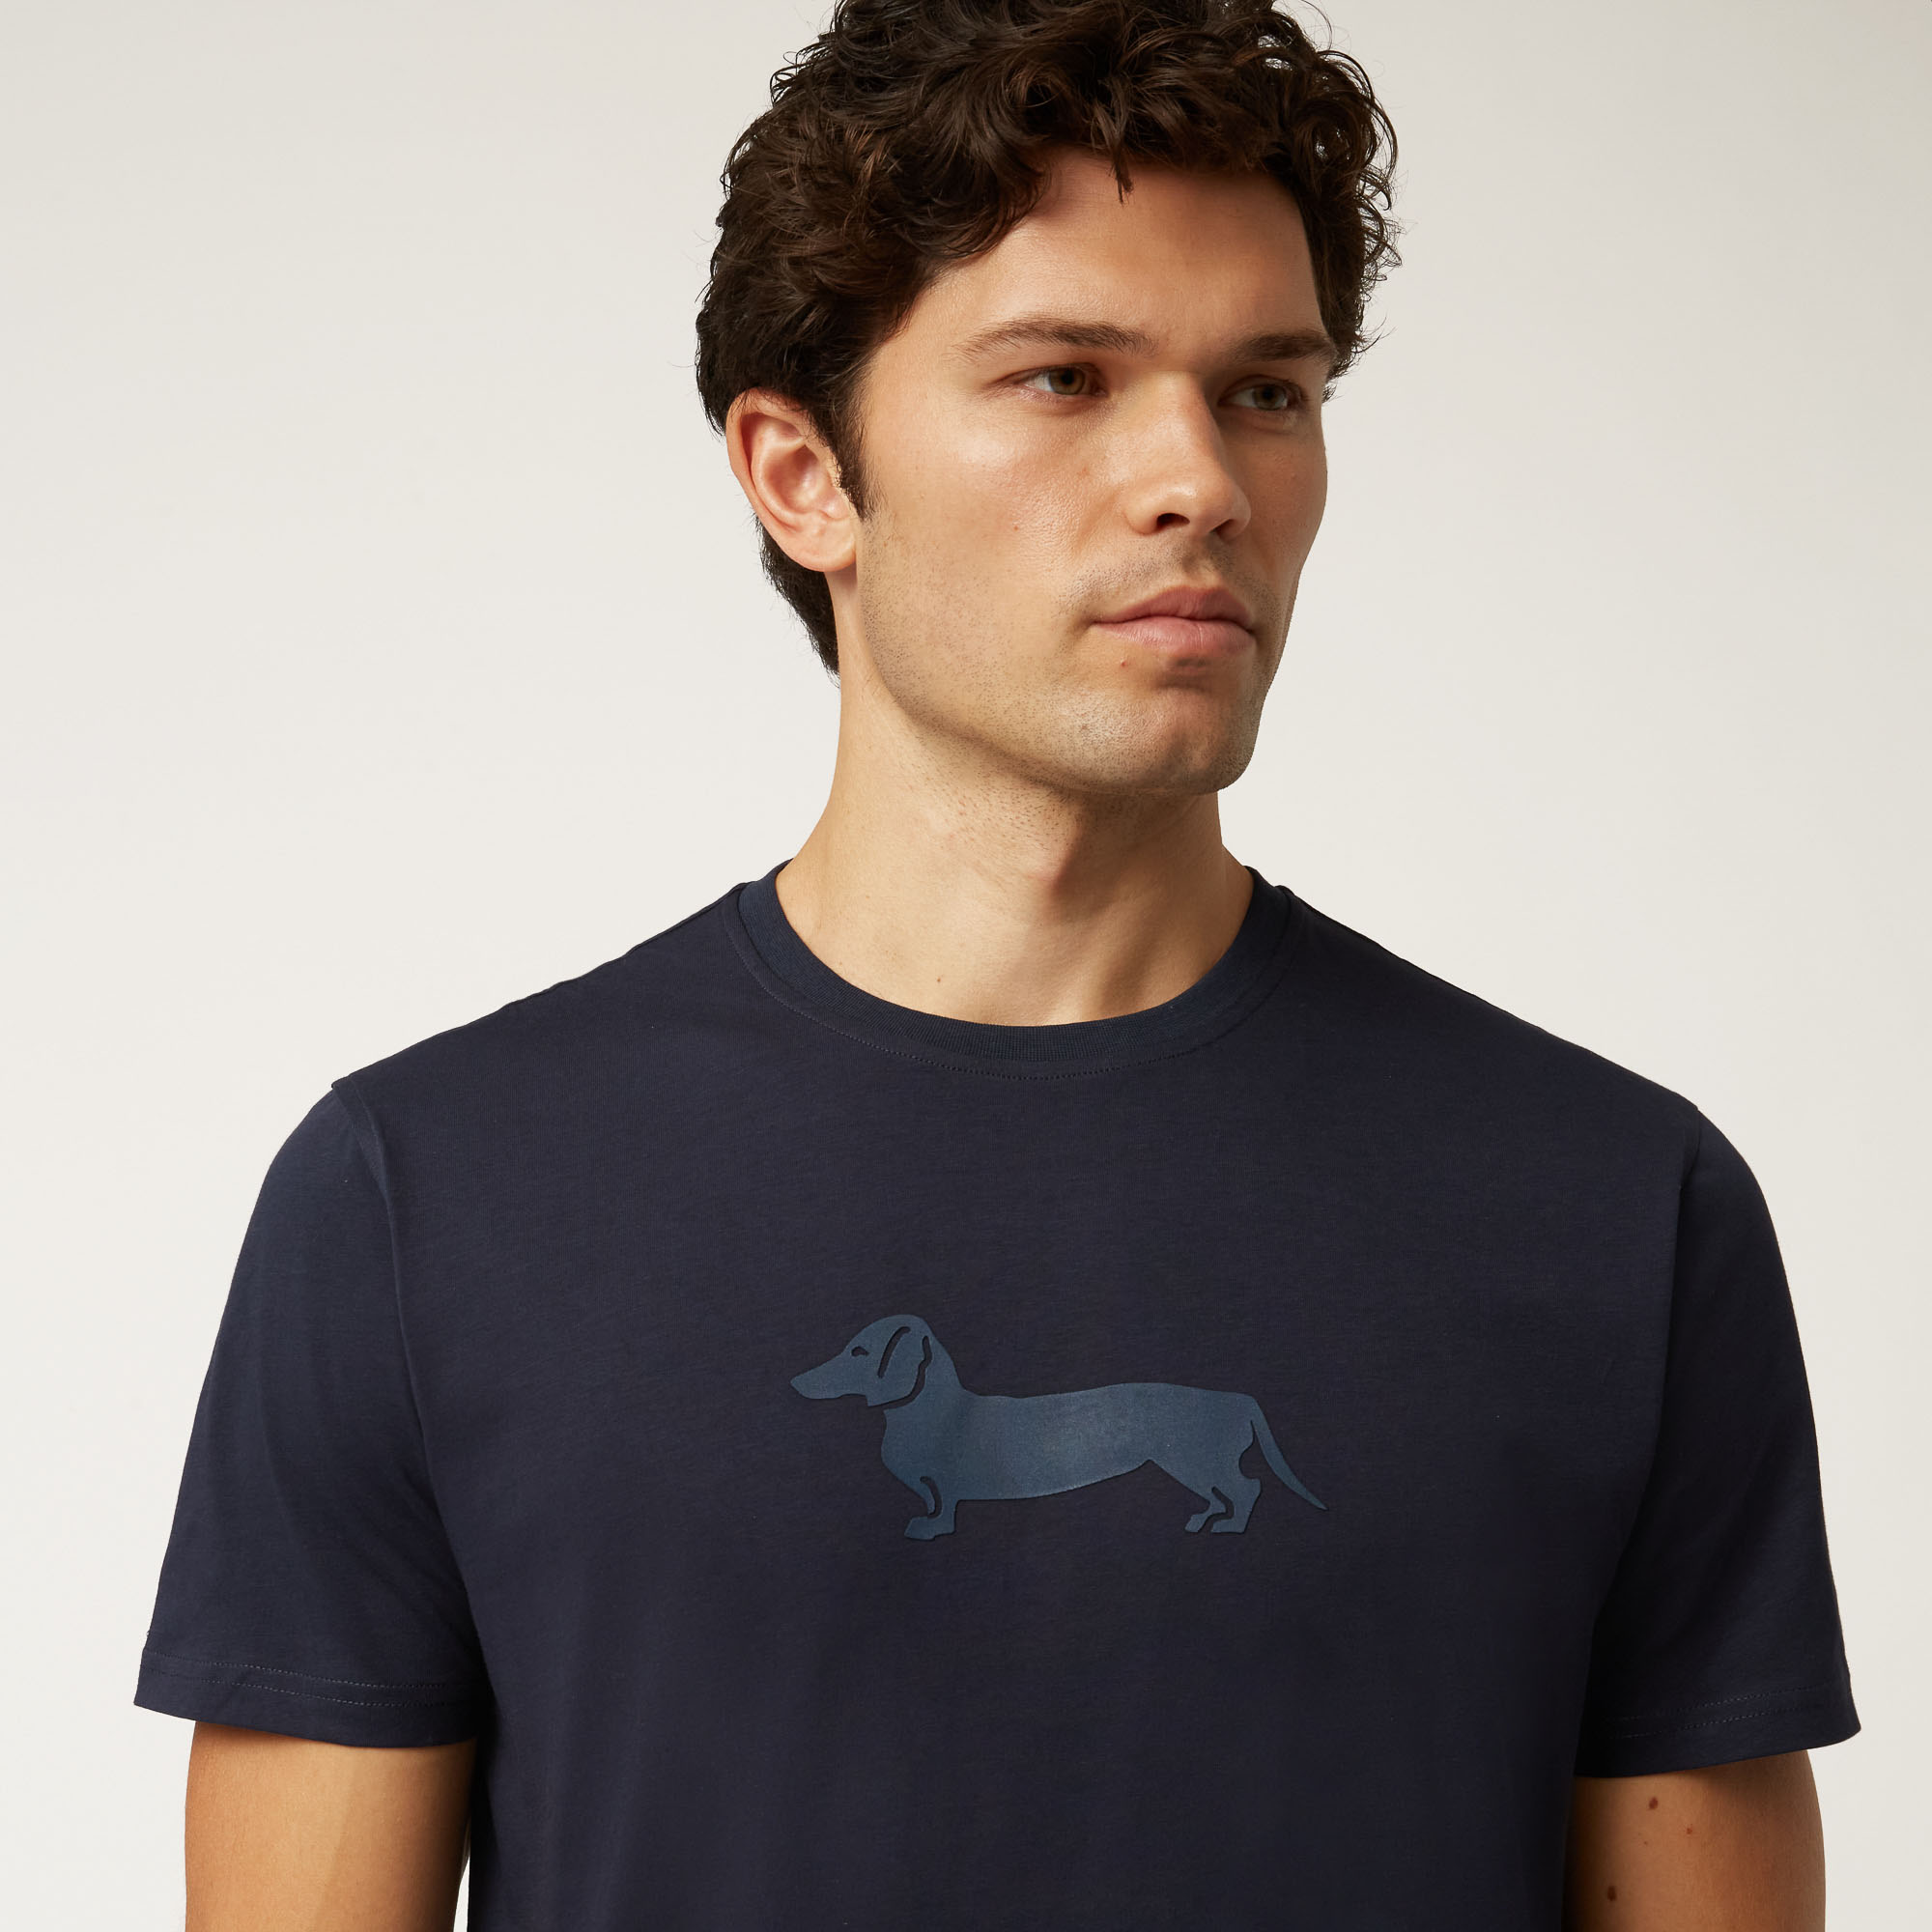 Cotton T-Shirt With Dachshund Print, Blue, large